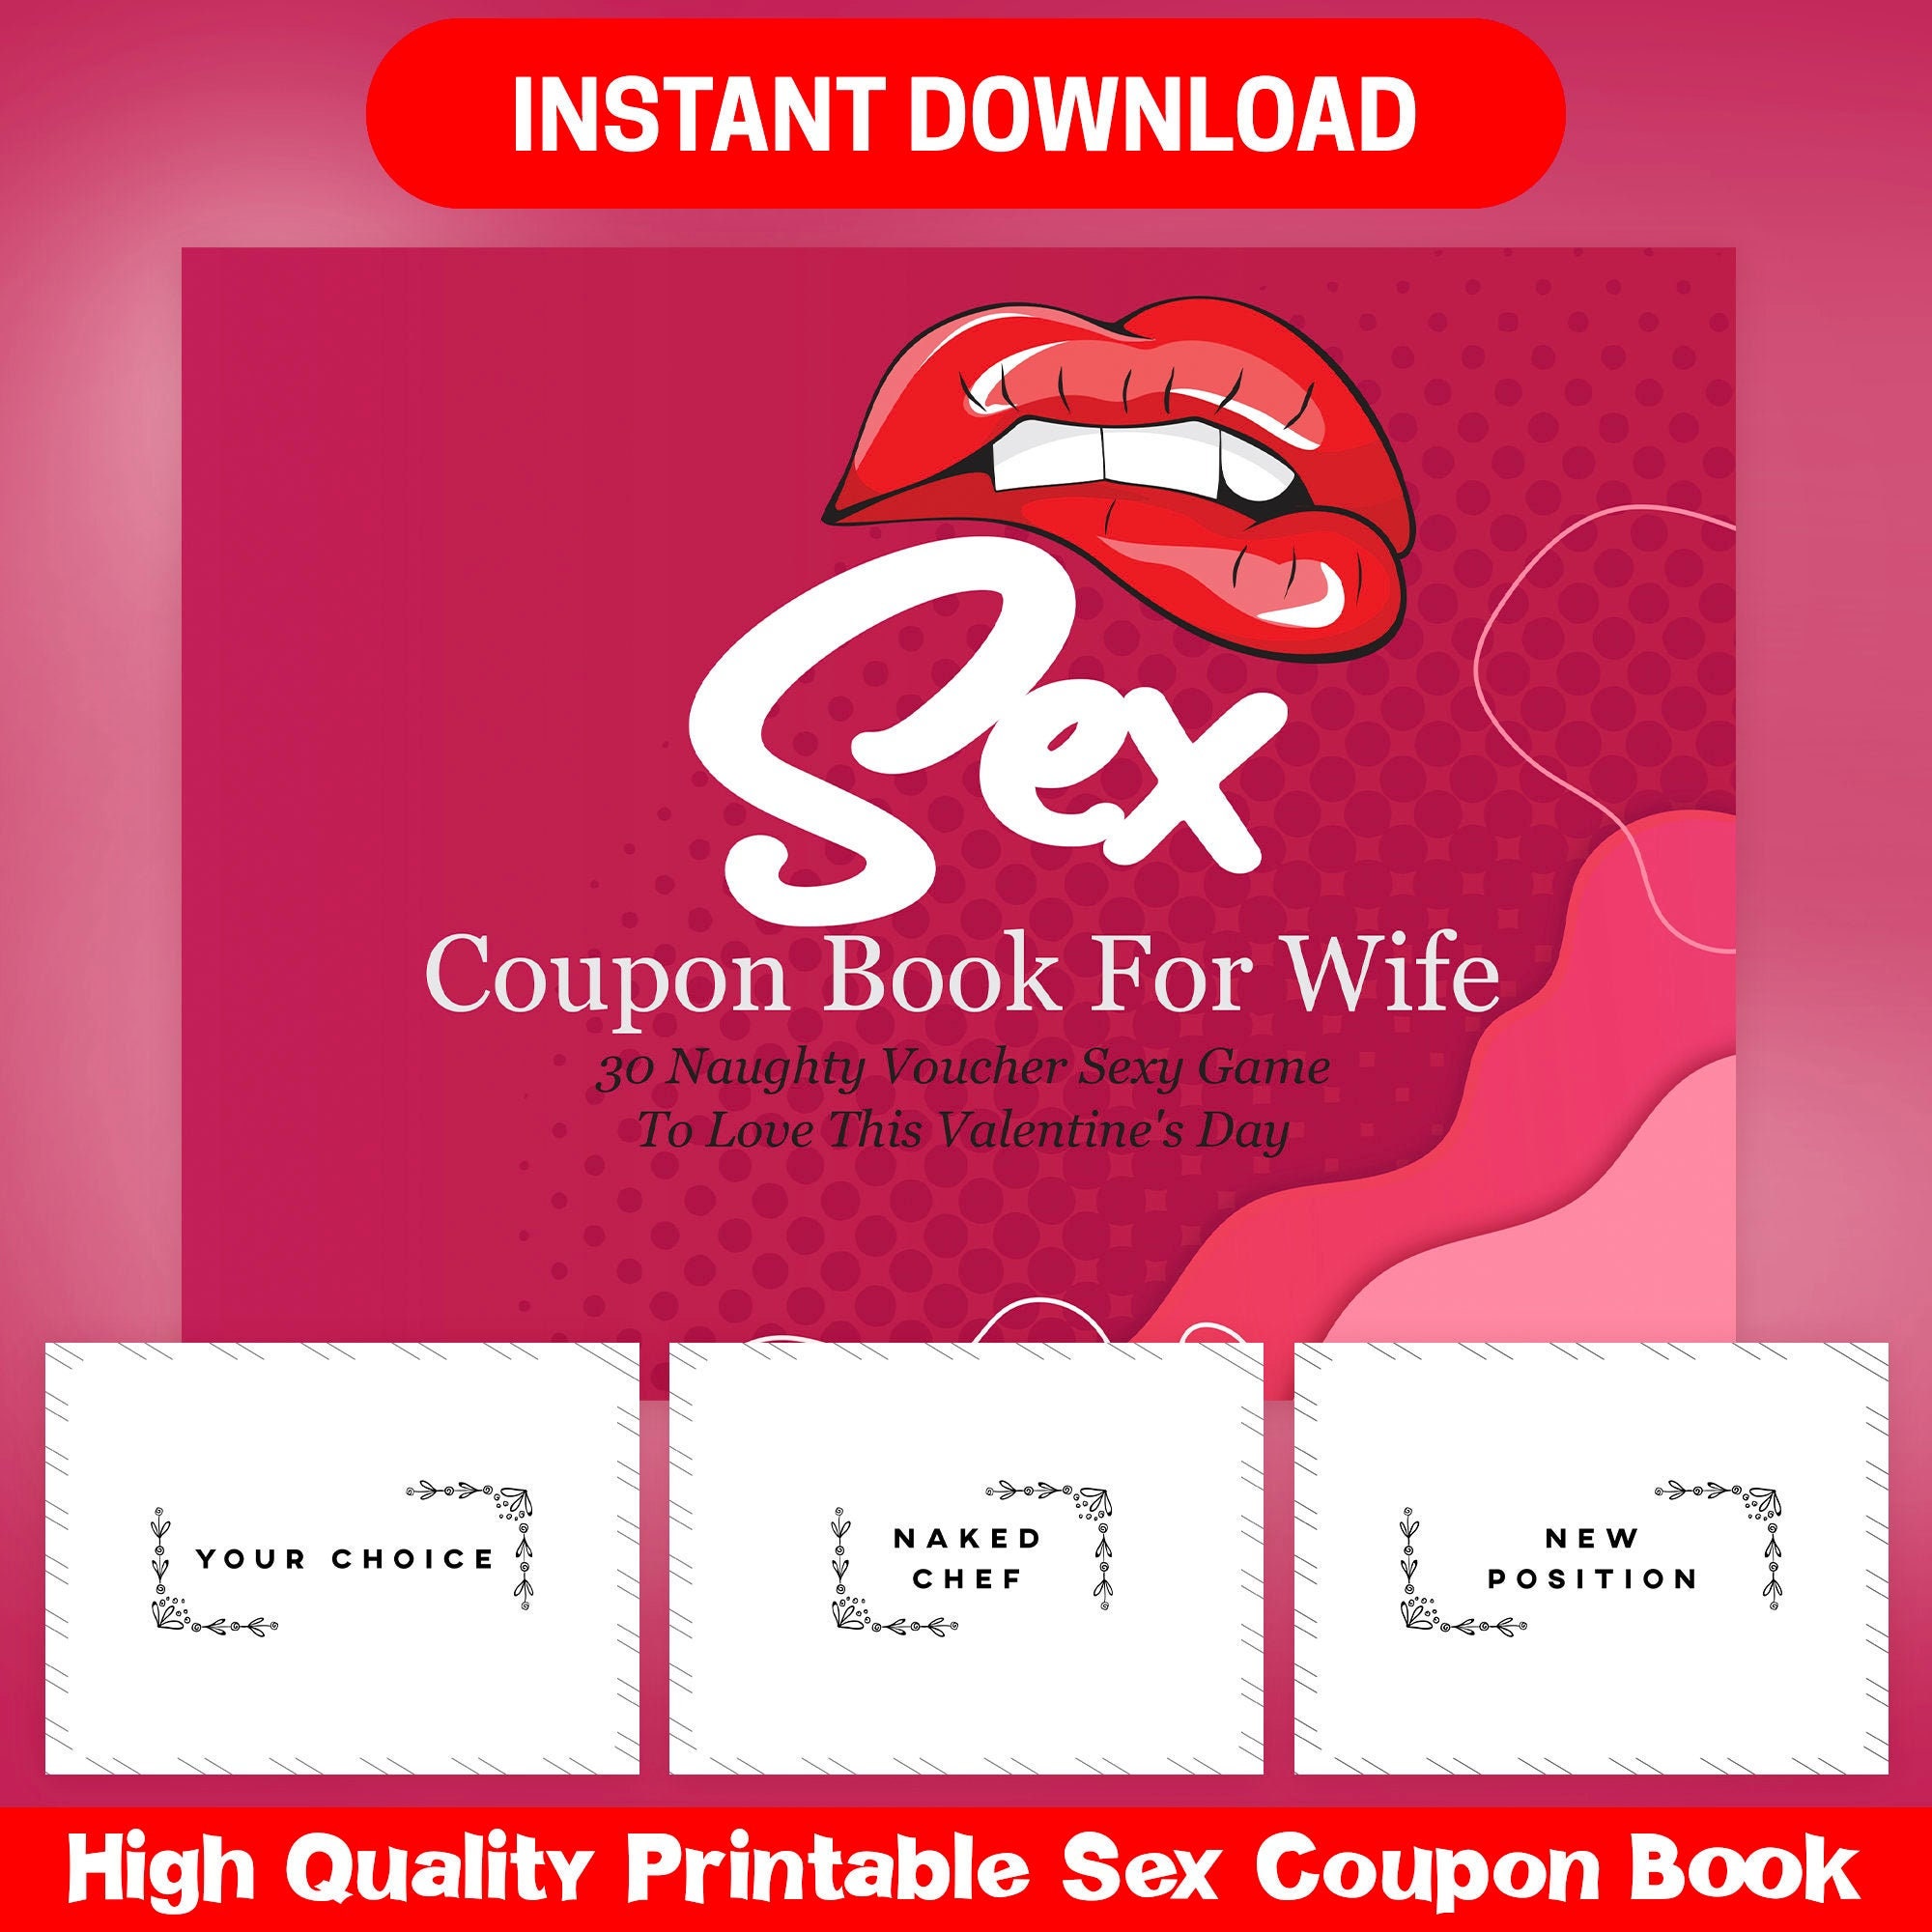 BEST VALUE 30 Sex Coupon Book for Wife Instant Download pic